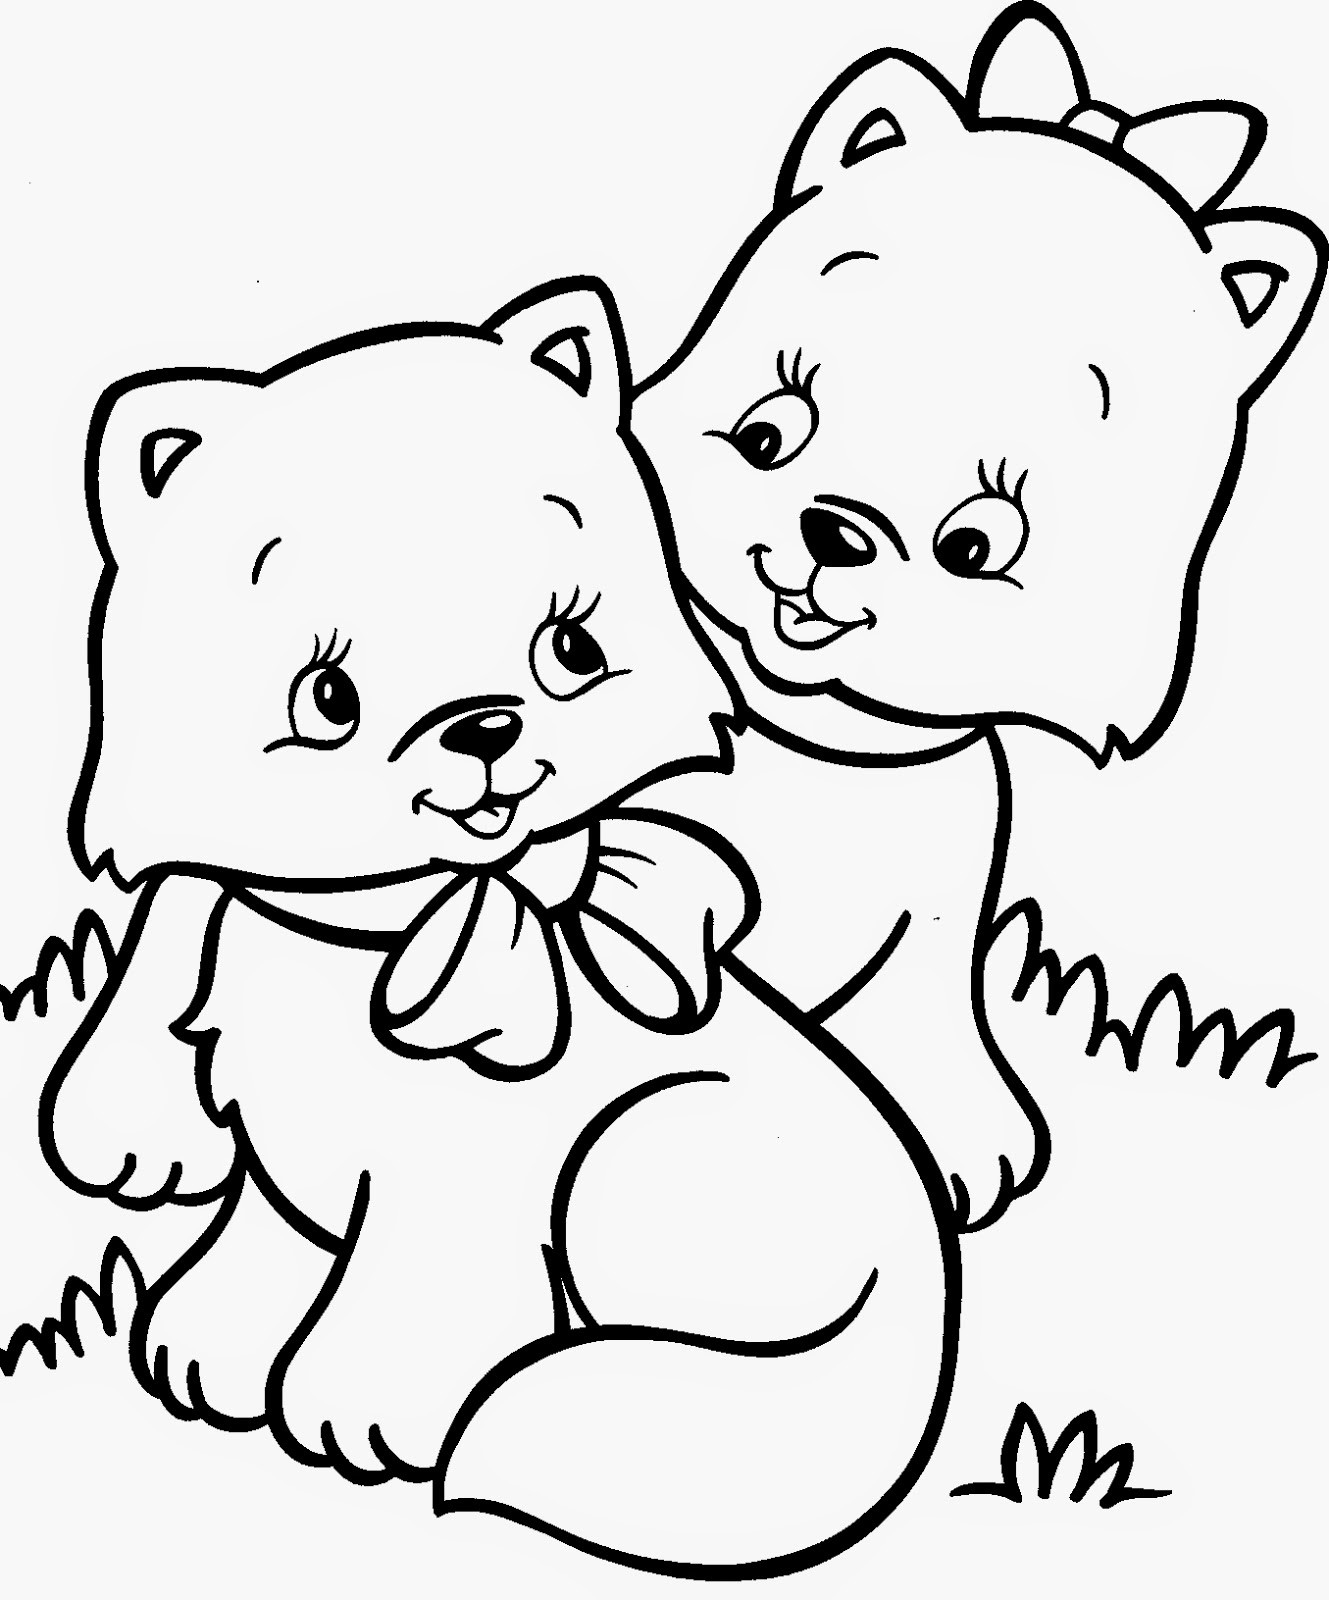 Cat Coloring Pages For Toddlers
 Navishta Sketch sweet cute angle cats